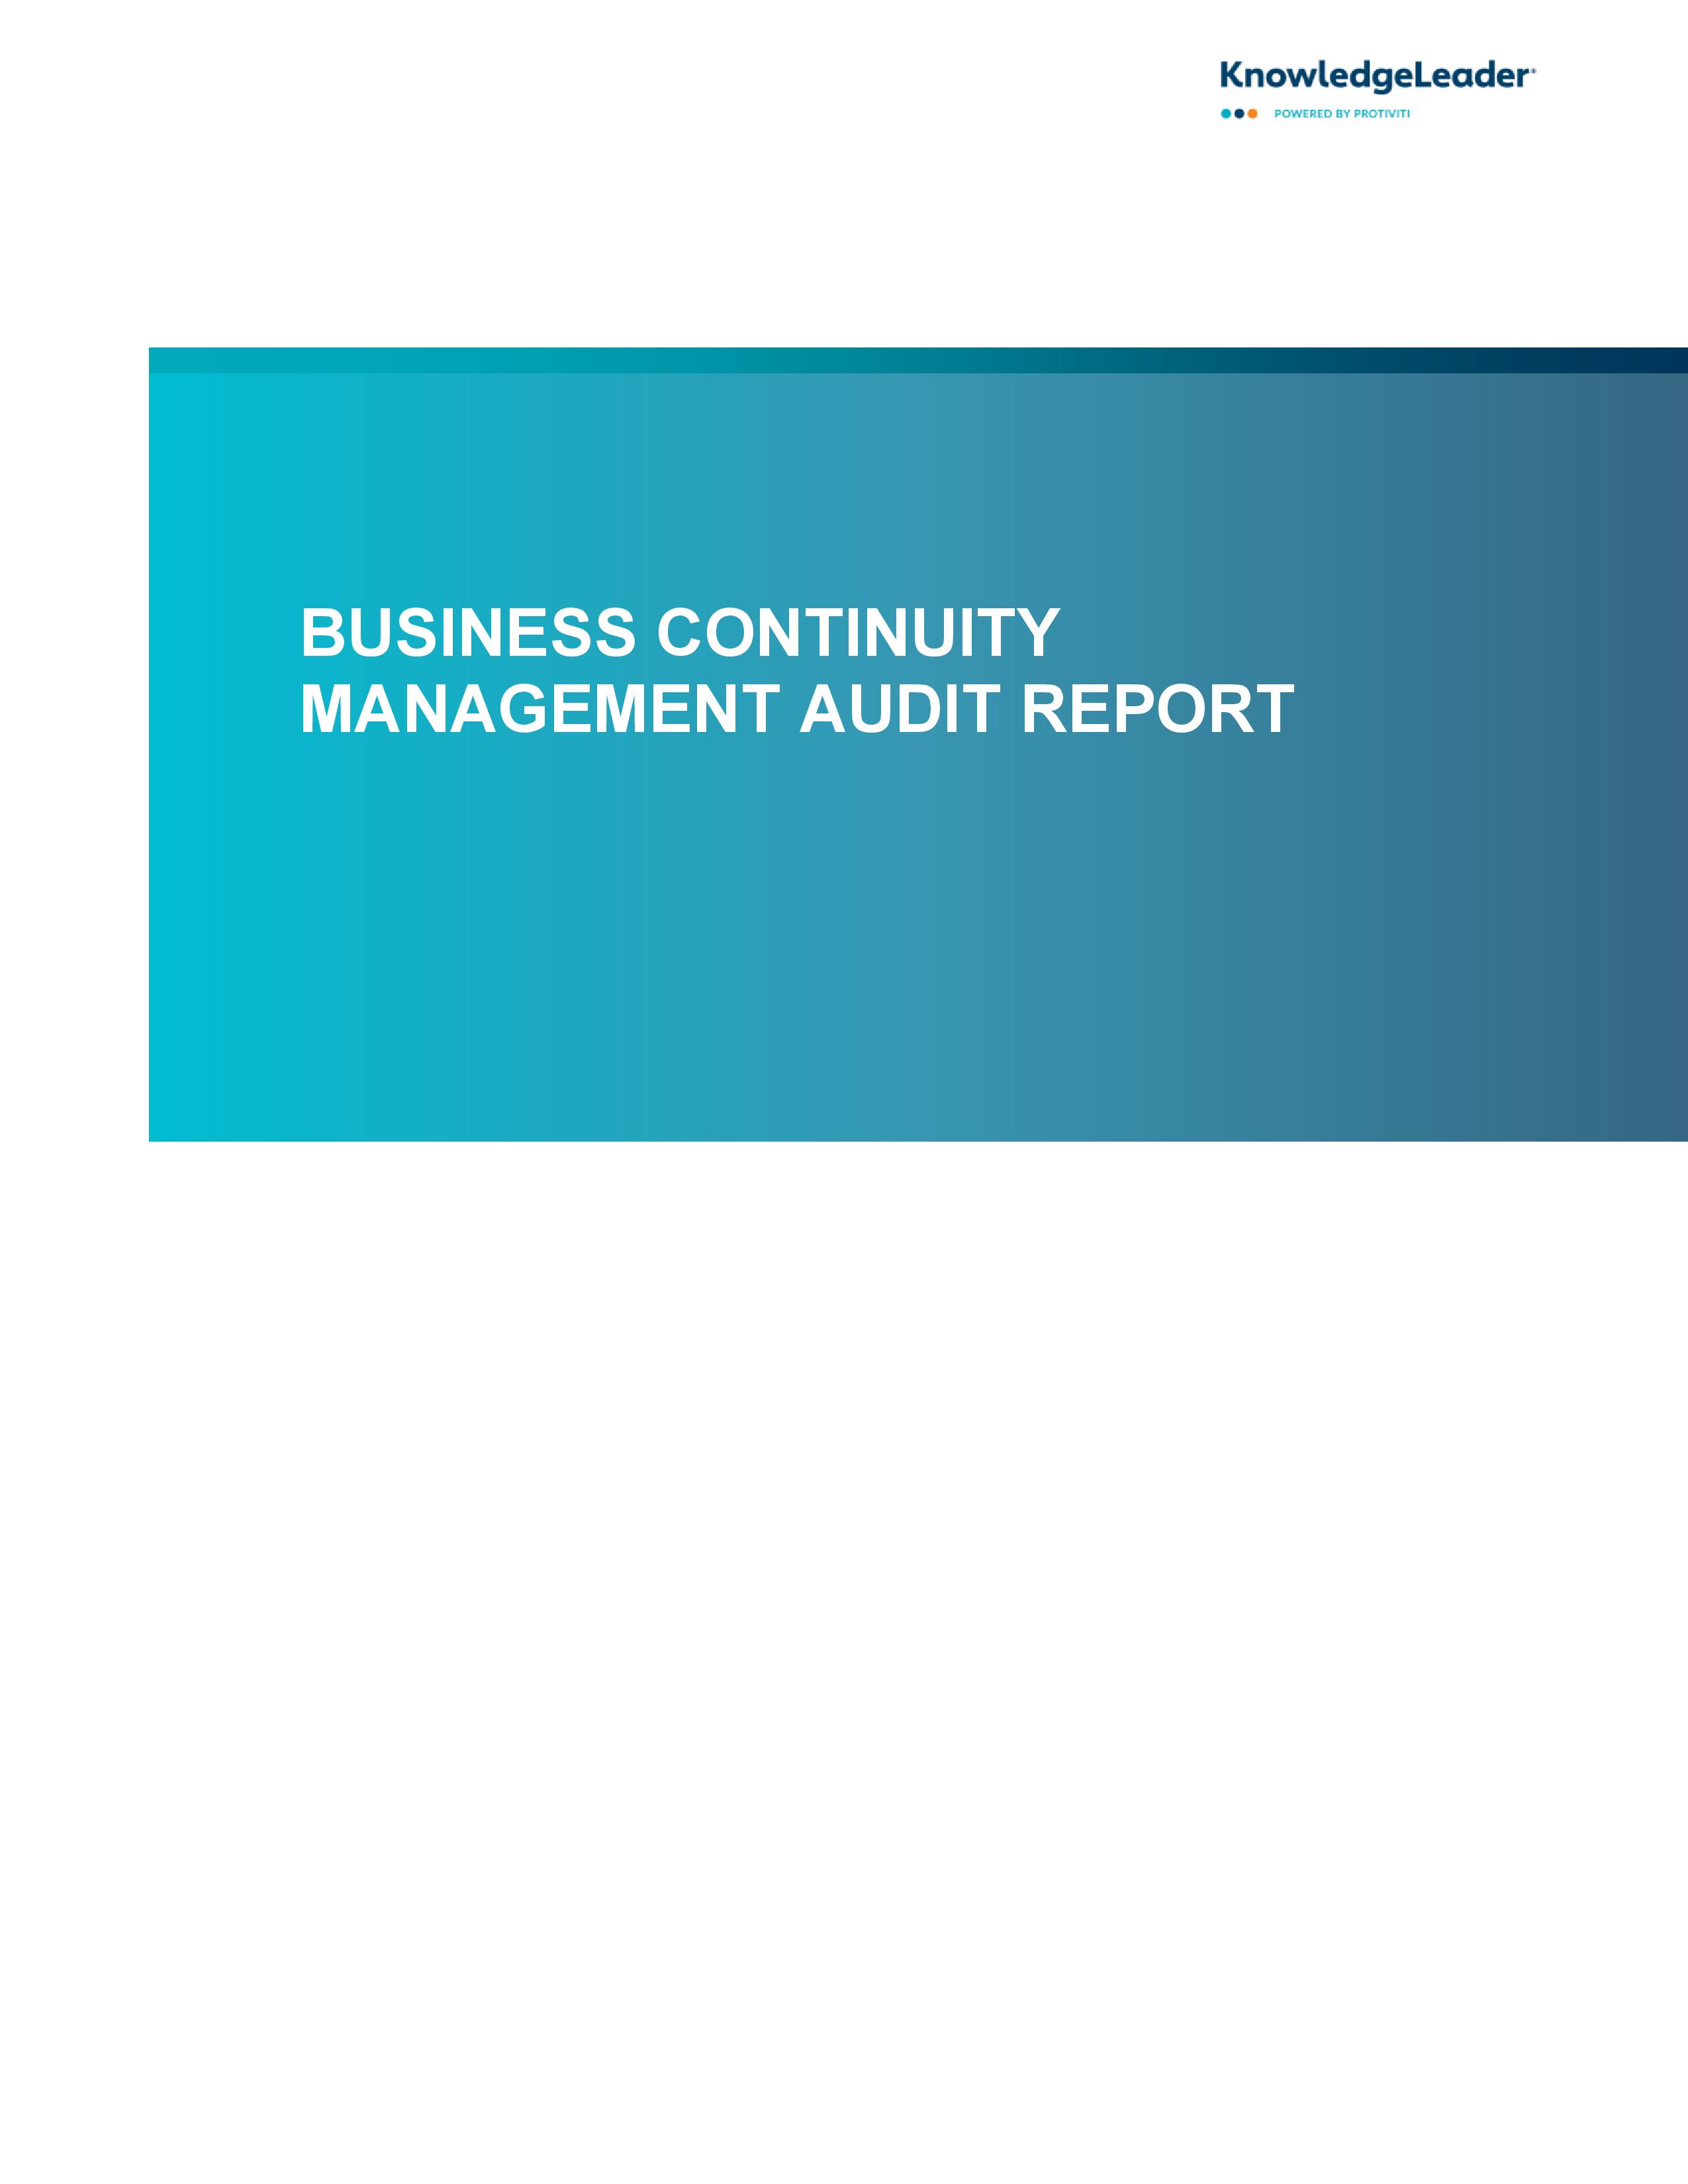 screenshot of the first page of Business Continuity Management Audit Report